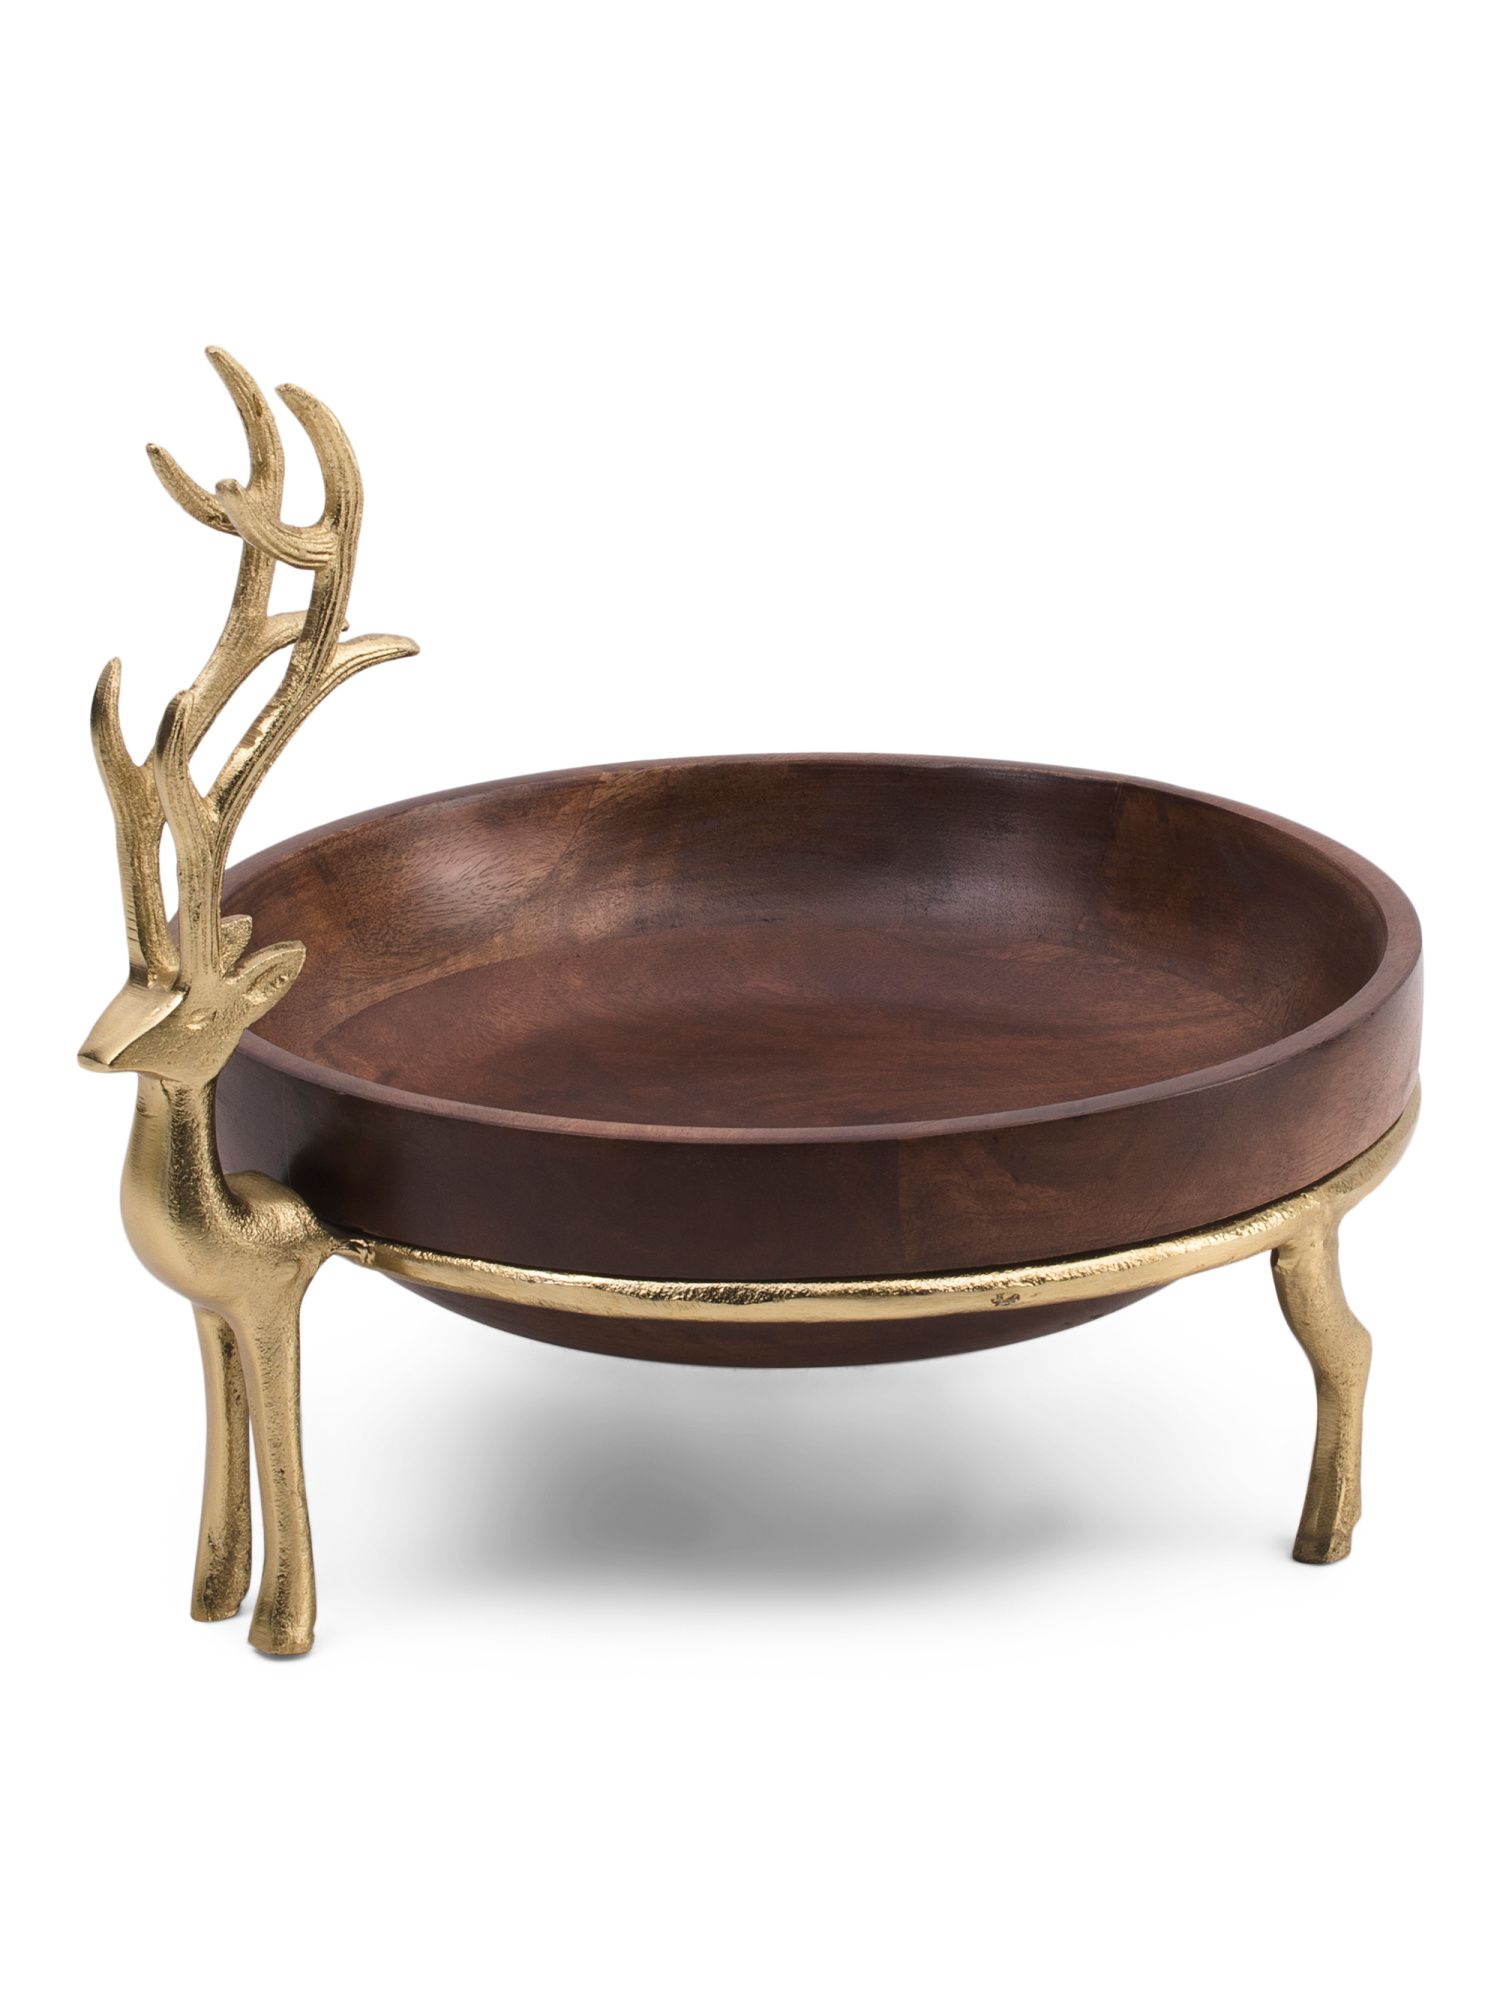 15in Reindeer Candy Bowl | TJ Maxx